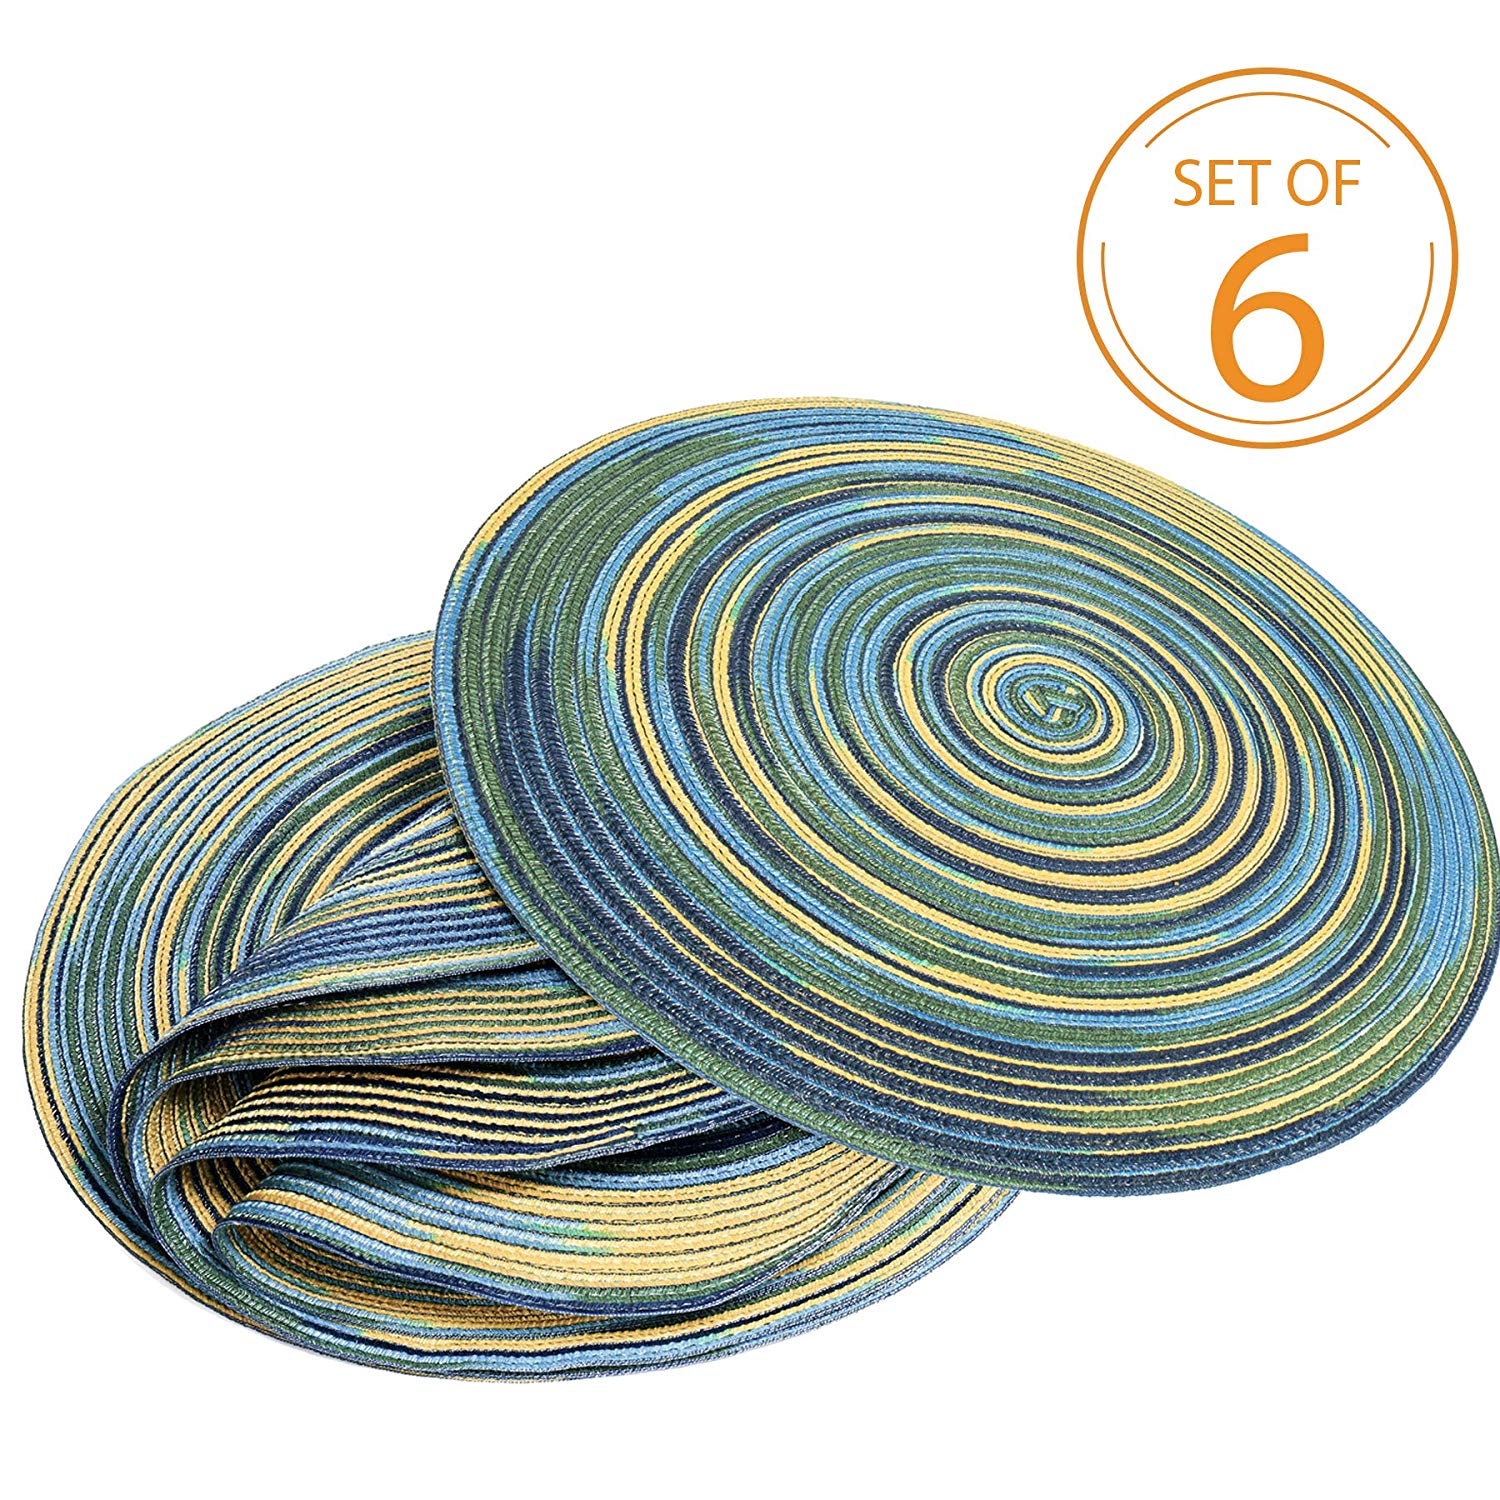 DOZZZ Holiday Placemats 6 Pack Braided Woven Placemats Round Placemats